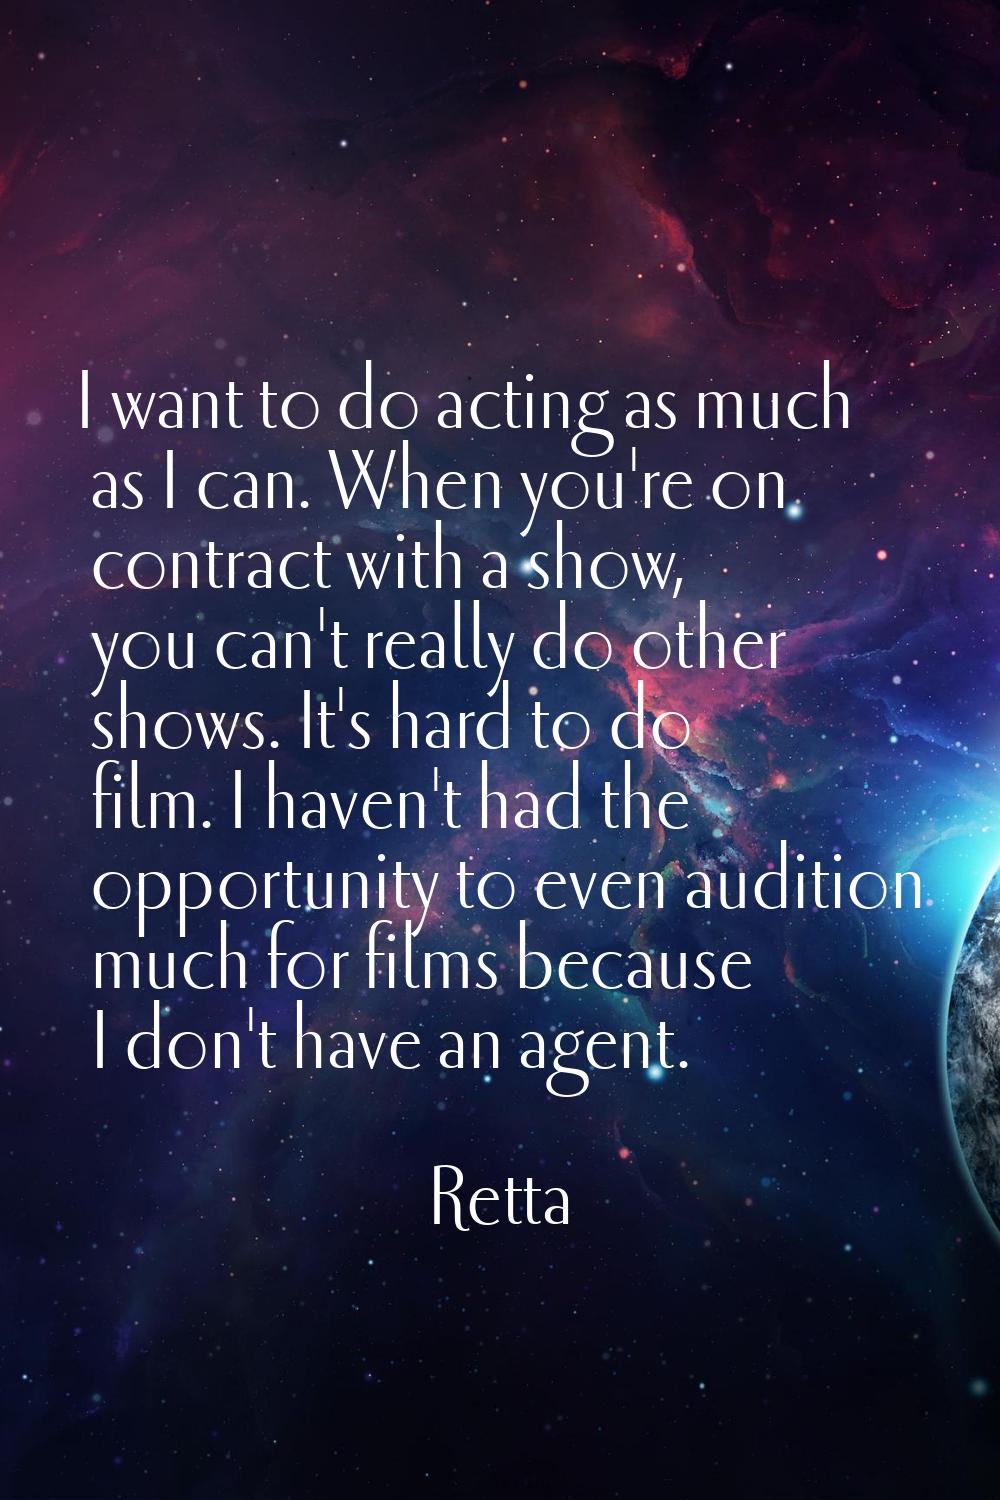 I want to do acting as much as I can. When you're on contract with a show, you can't really do othe